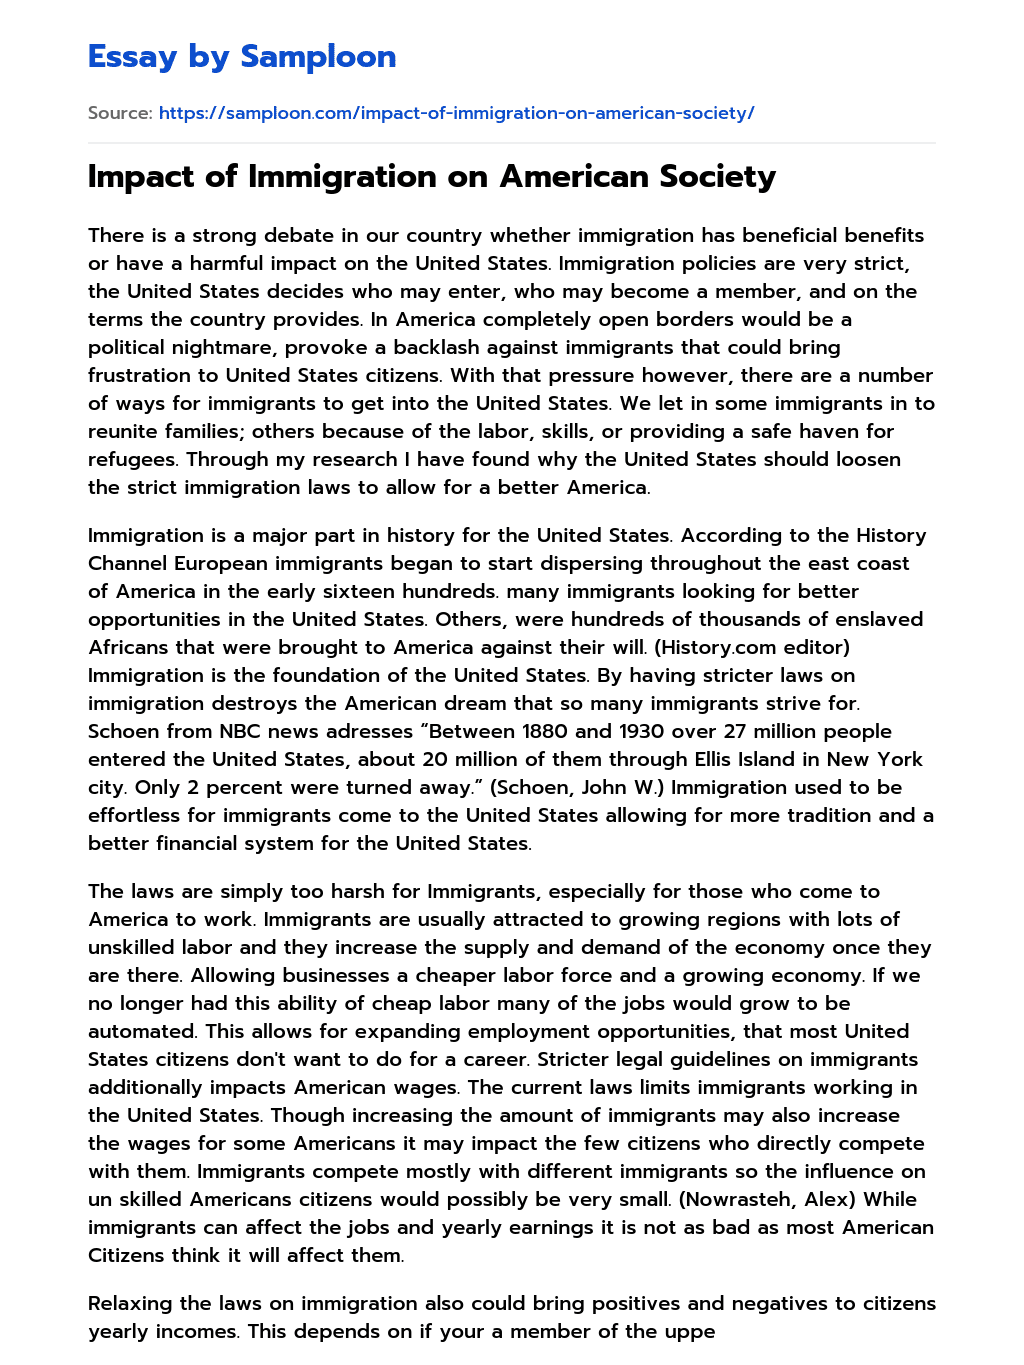 Impact of Immigration on American Society essay